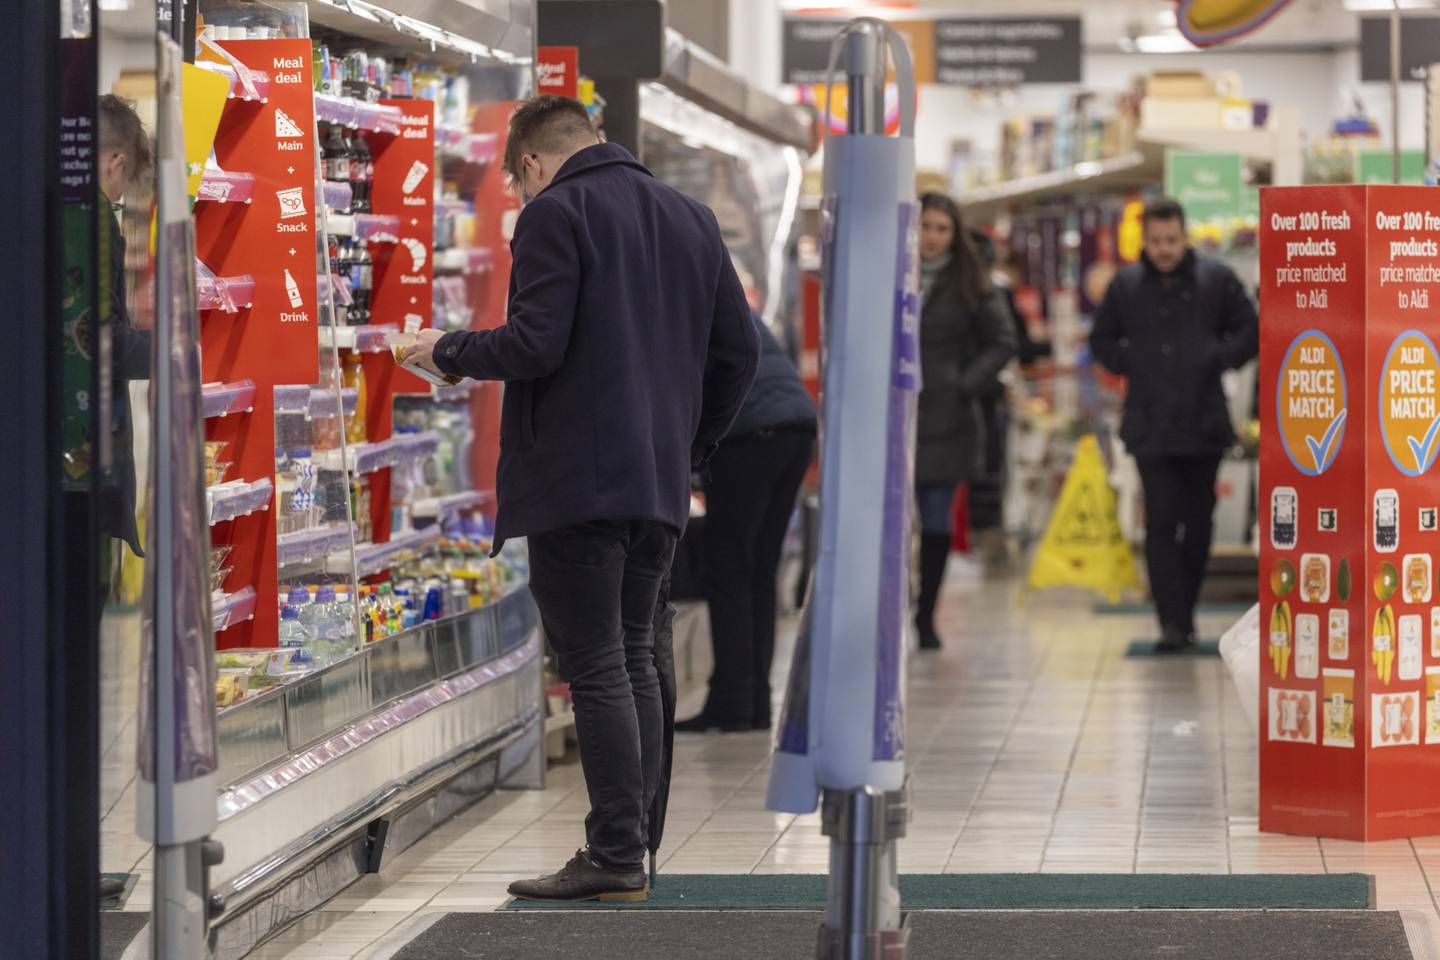 Shoppers spent big on food and drink at UK supermarkets during the Christmas season. Bloomberg